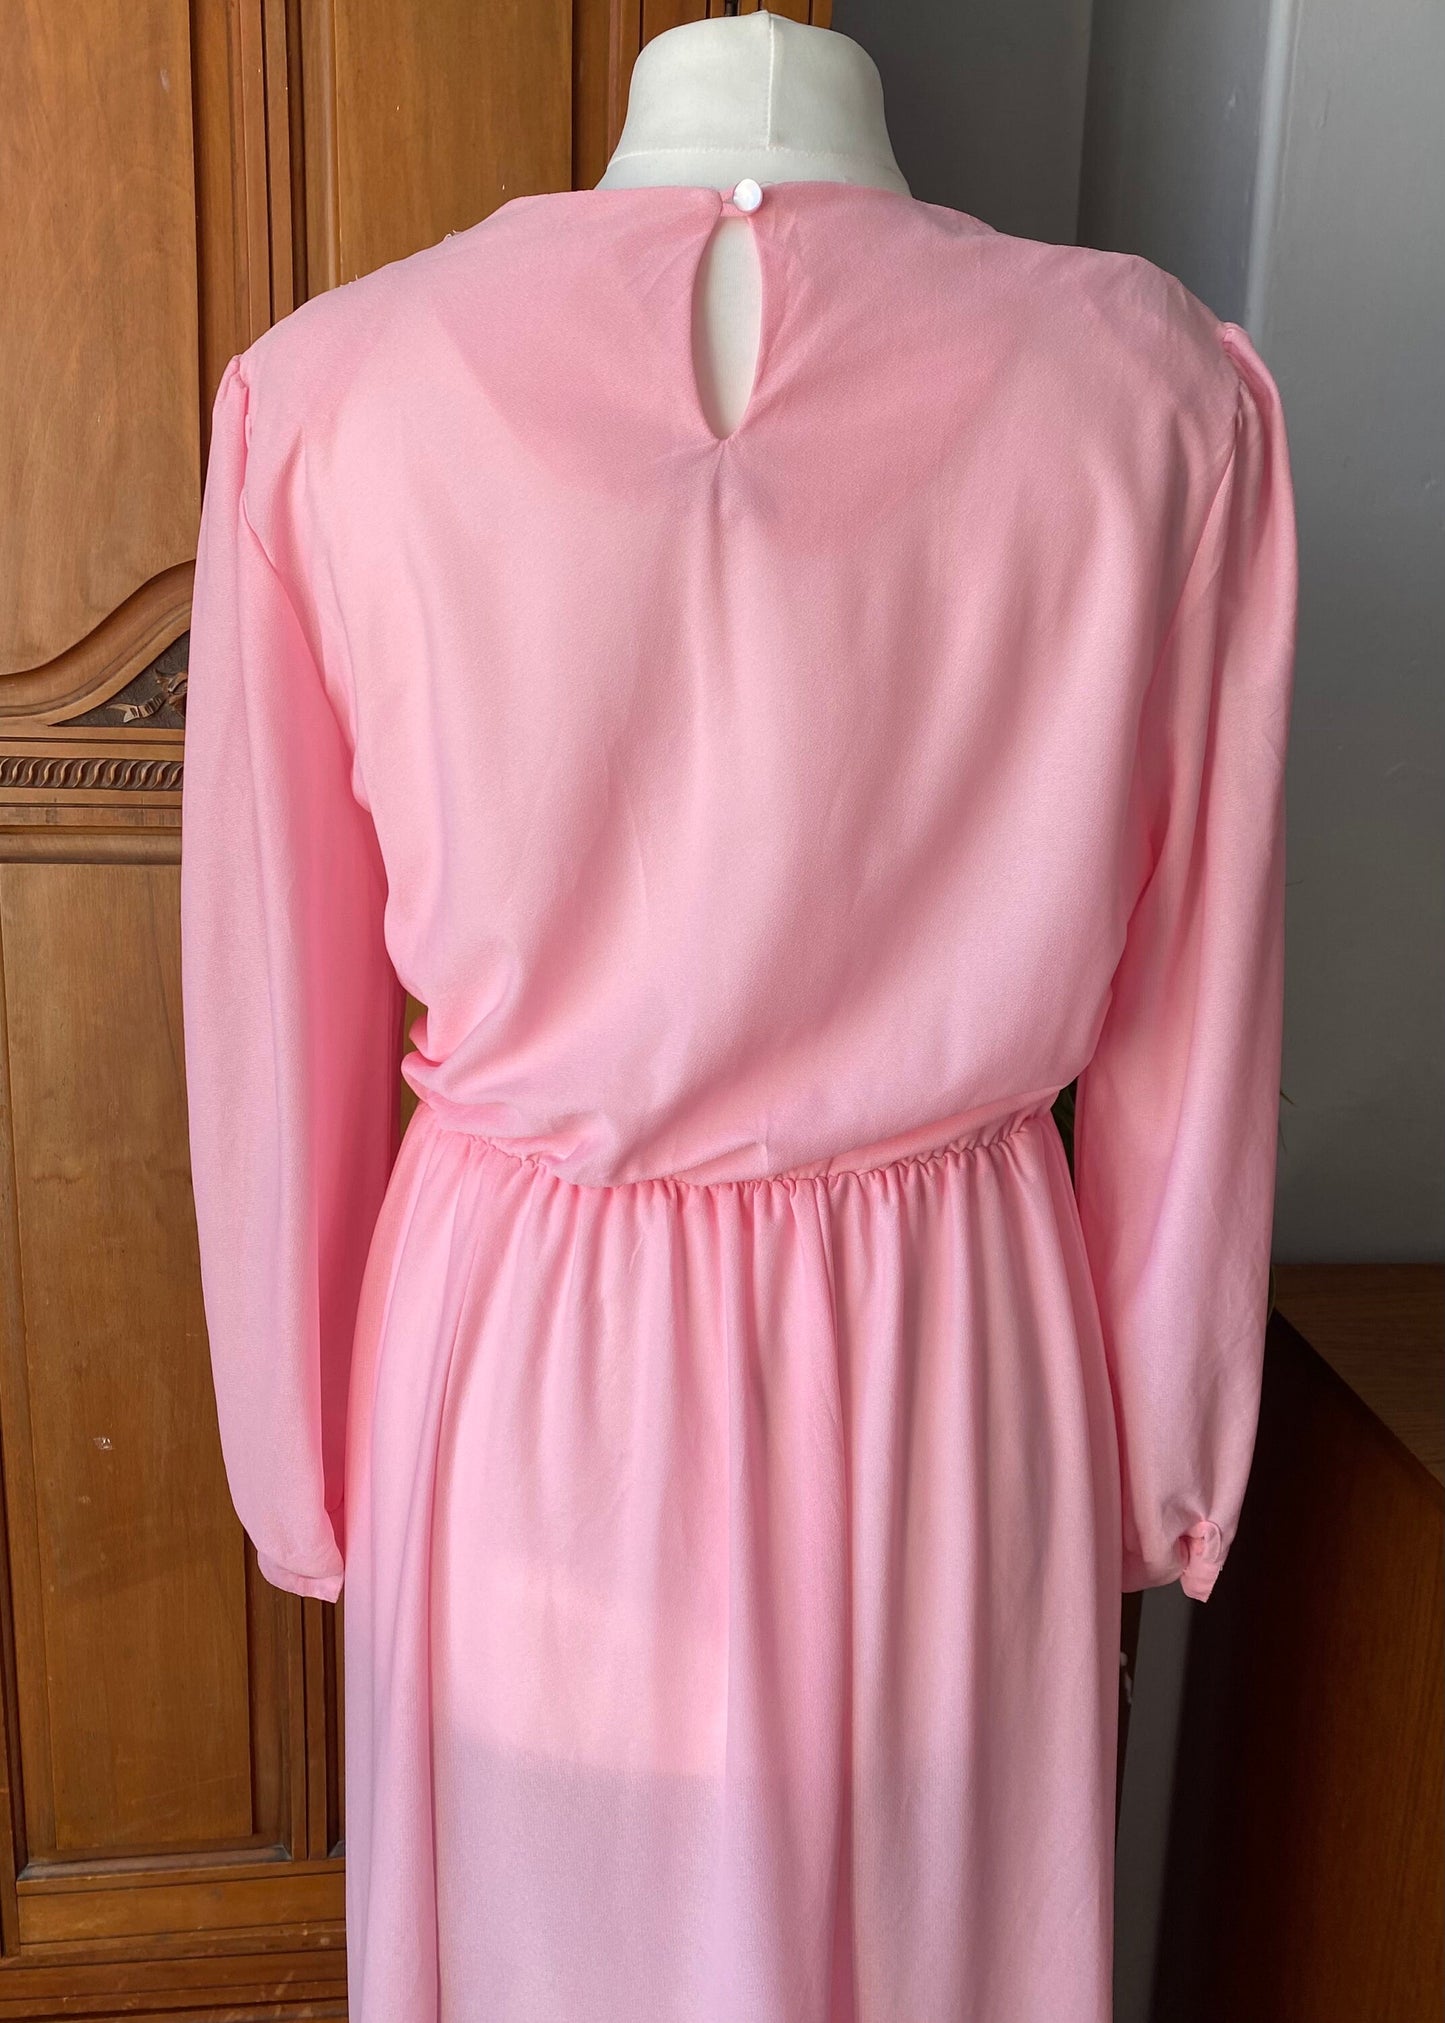 70s/80s pink maxi dress with draped neck line. Approx UK size 16